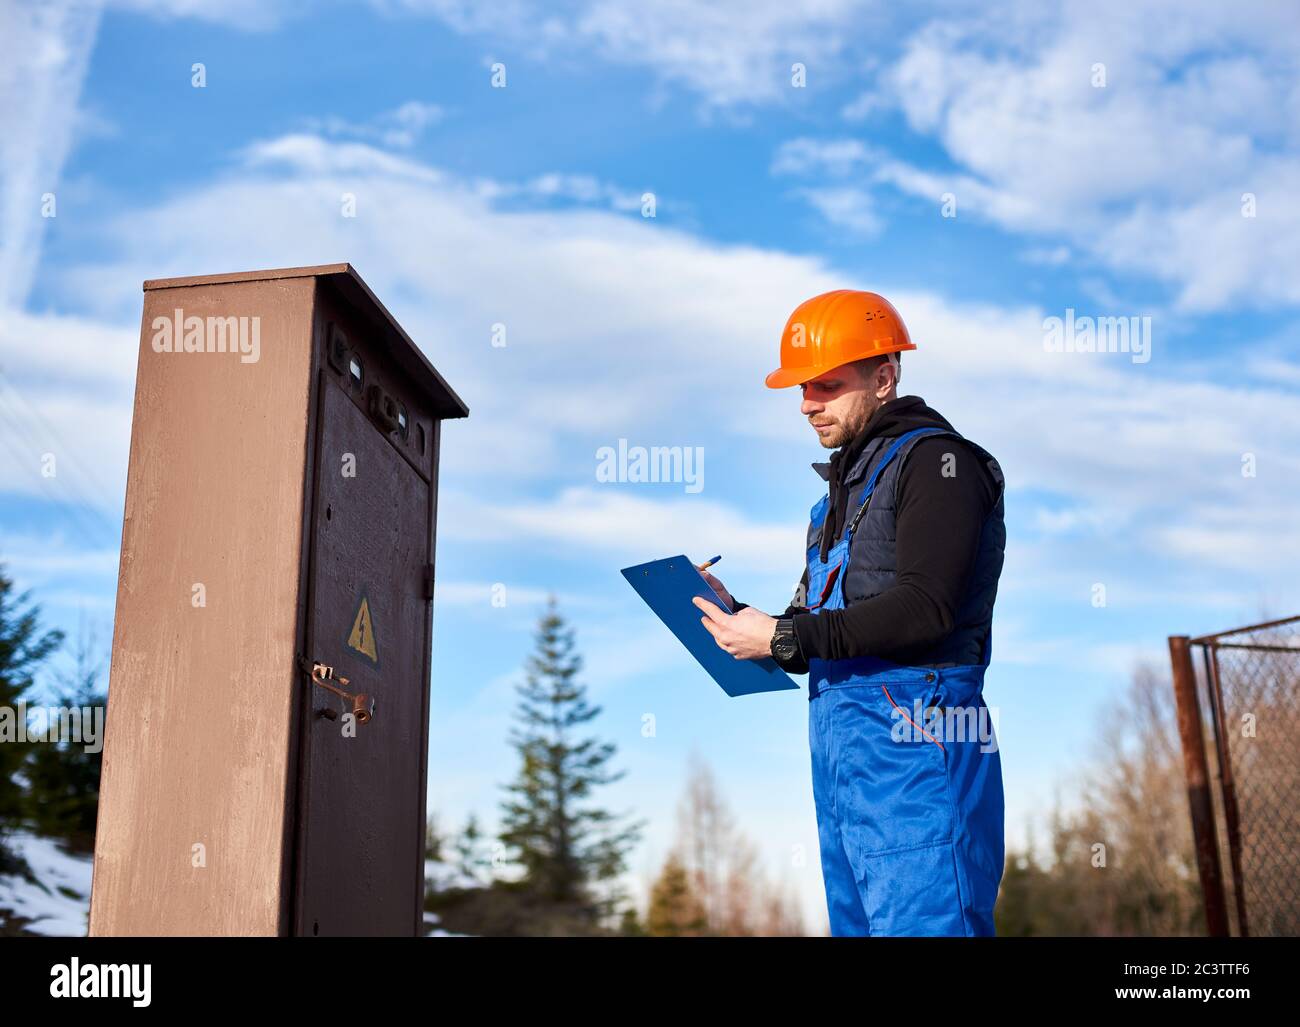 Oil inspector in protective overalls and orange helmet making notes next to a transformer outdoors against blue sky with white clouds. Concept of petroleum industry. Stock Photo